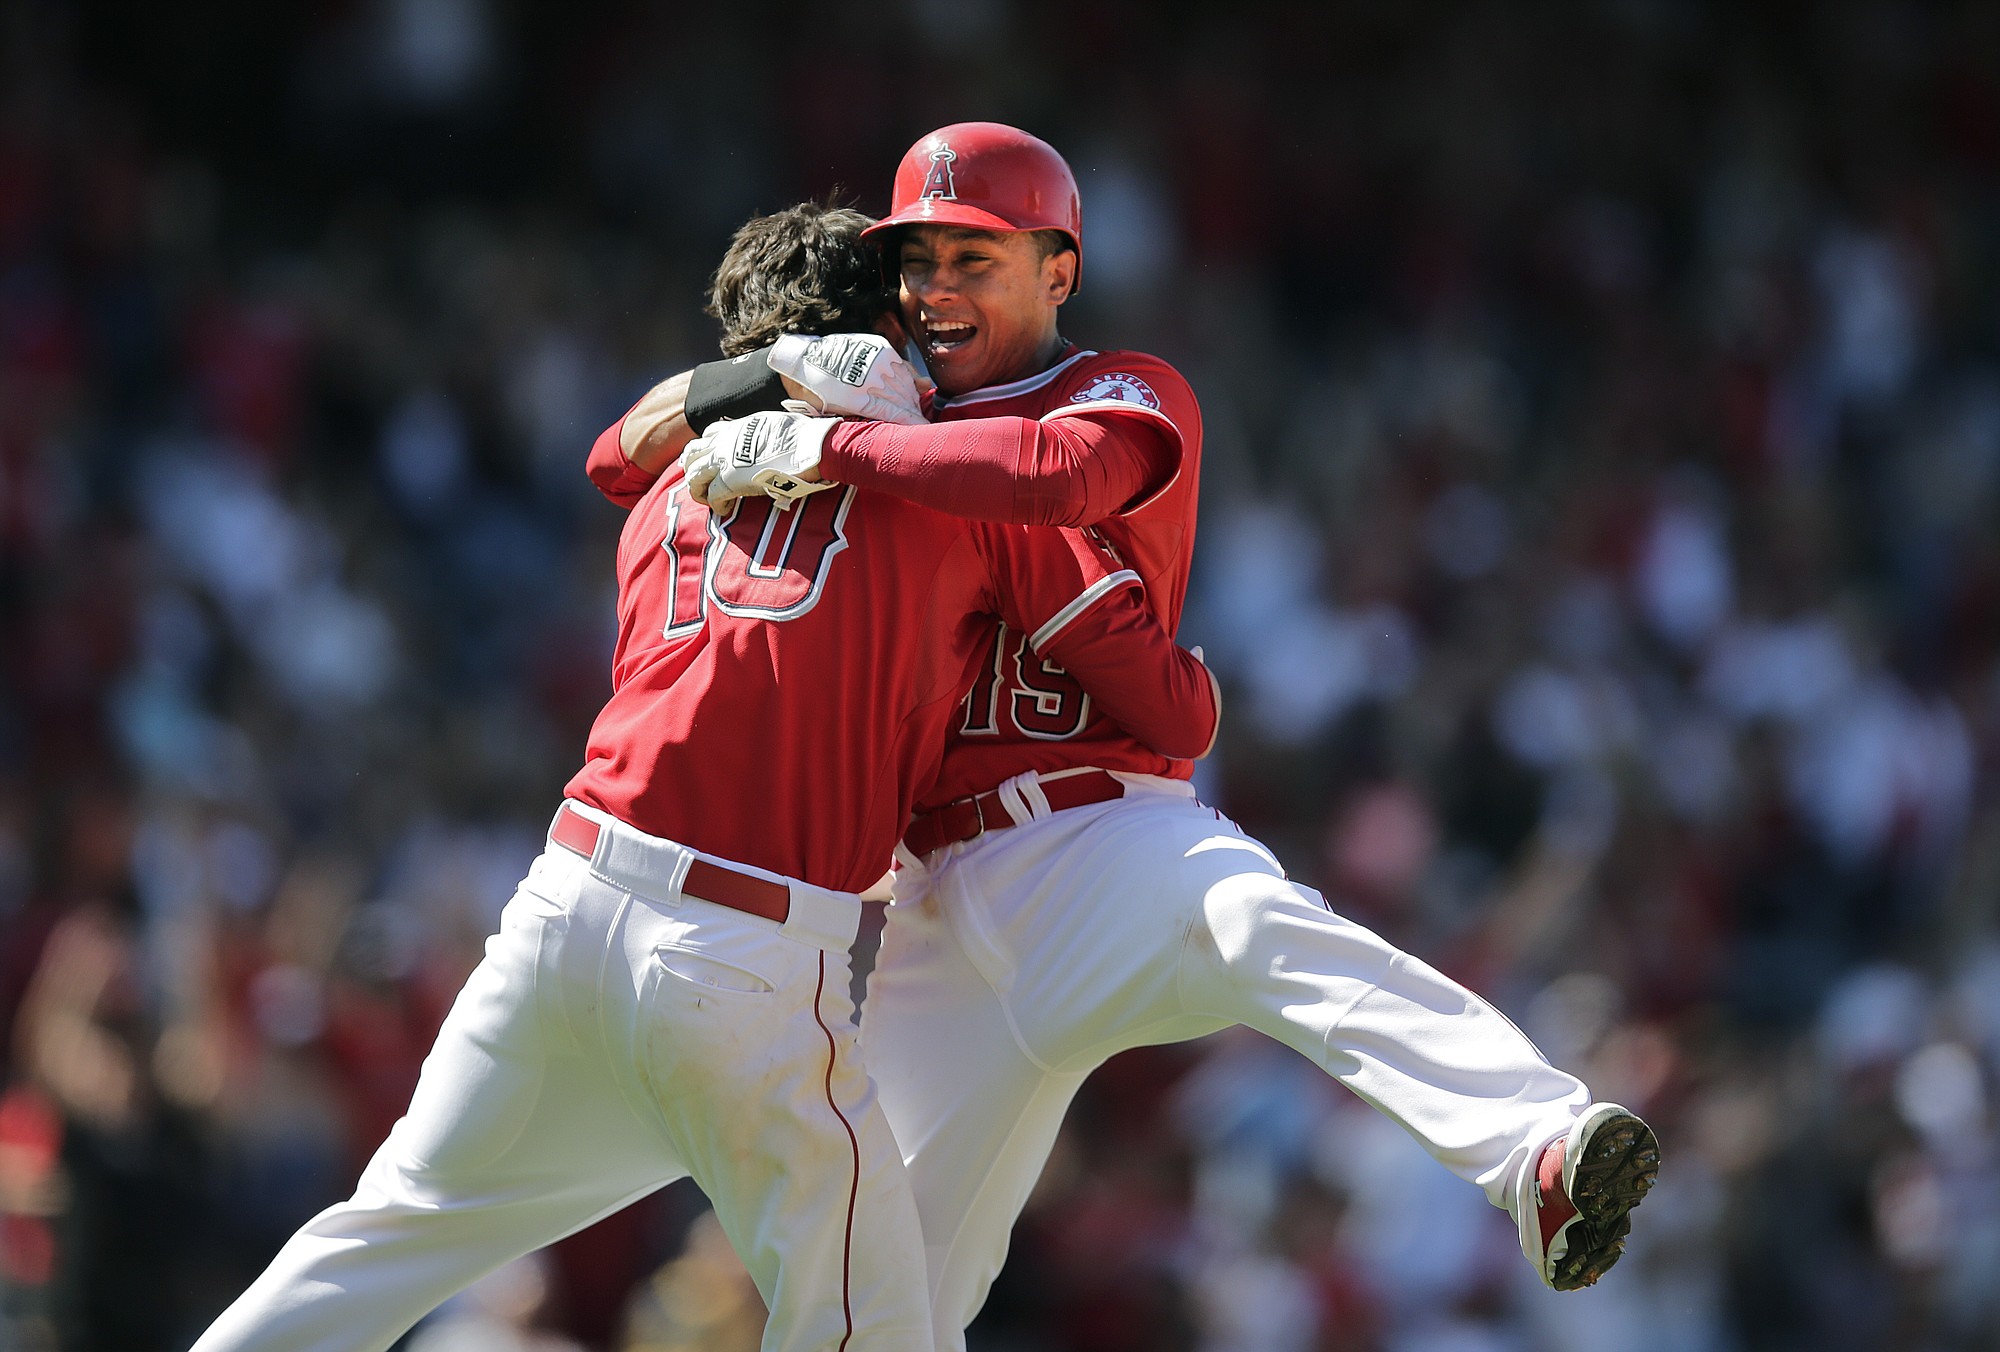 Los Angeles Angels' Grant Green, left, celebrates his ninth-inning walk-off single with Efren Navarro as the Angels beat the Seattle Mariners on Sunday, 6-5. (AP Photo/Jae C.